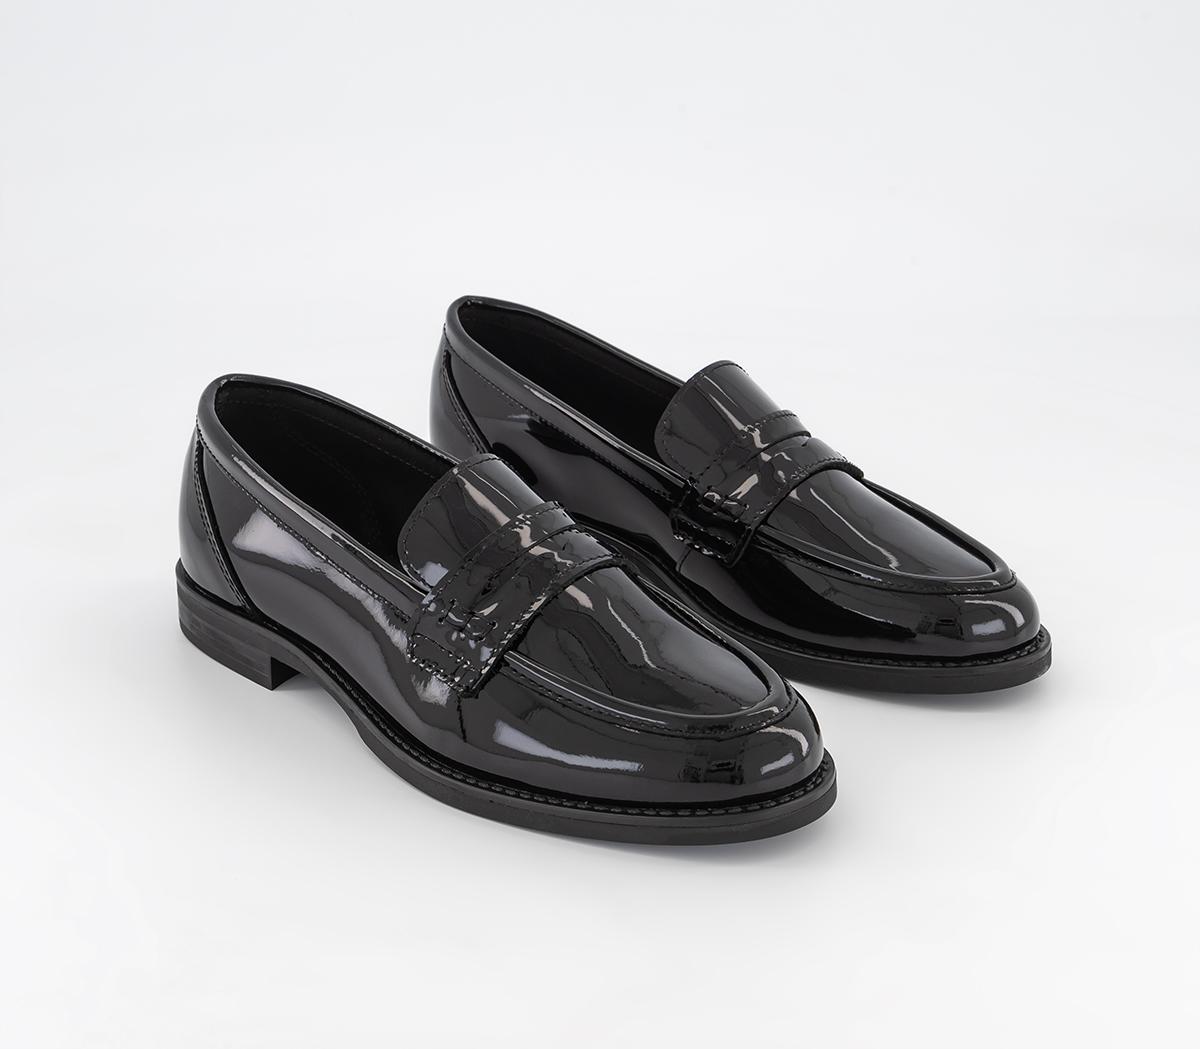 OFFICE First Class - Classic Penny Loafers Black Patent Leather - Women ...